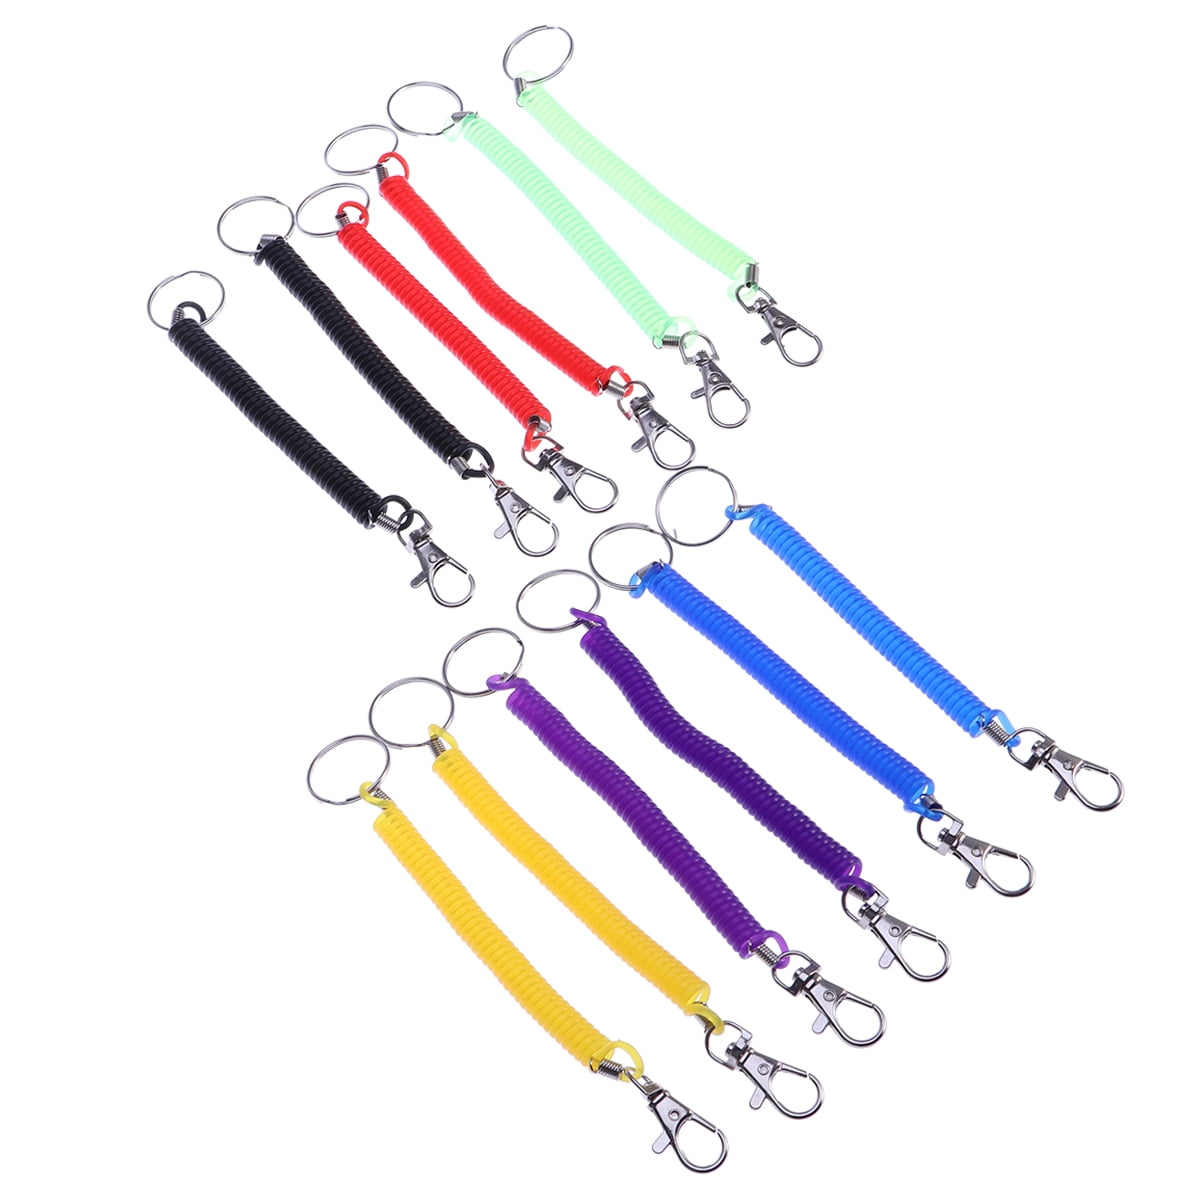 12 Pieces Stretchy Spiral Keyring Colourful Plastic Keychain Spring Key Holder for School 6 Colors Work